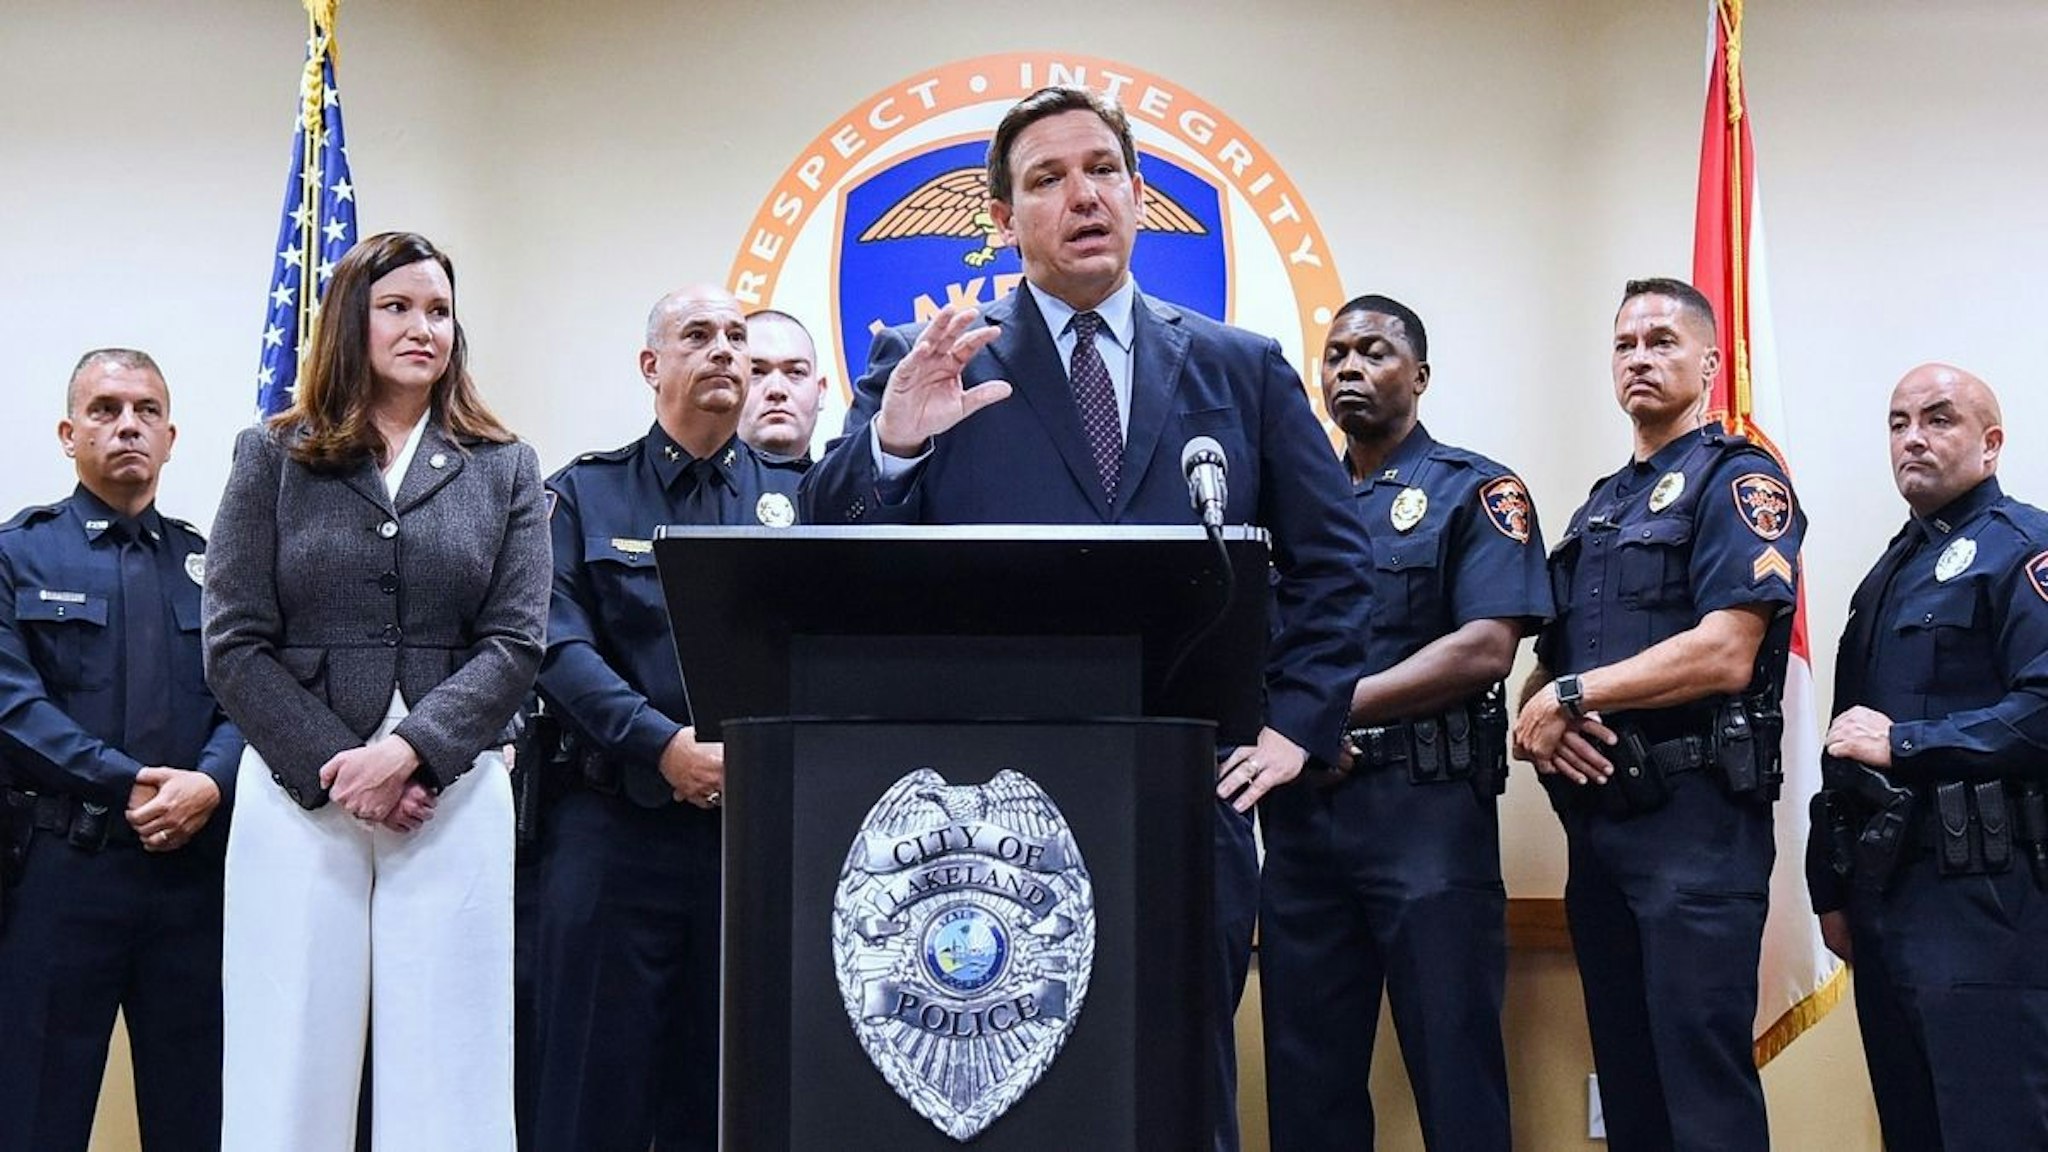 Florida Attorney General Ashley Moody ( second left) looks on as Governor Ron DeSantis speaks at a press conference at the Lakeland, Florida Police Department to announce a new proposal that would provide $5,000 signing bonuses to those who sign on to be law enforcement officers from within the state of Florida, and those who come from out-of-state.